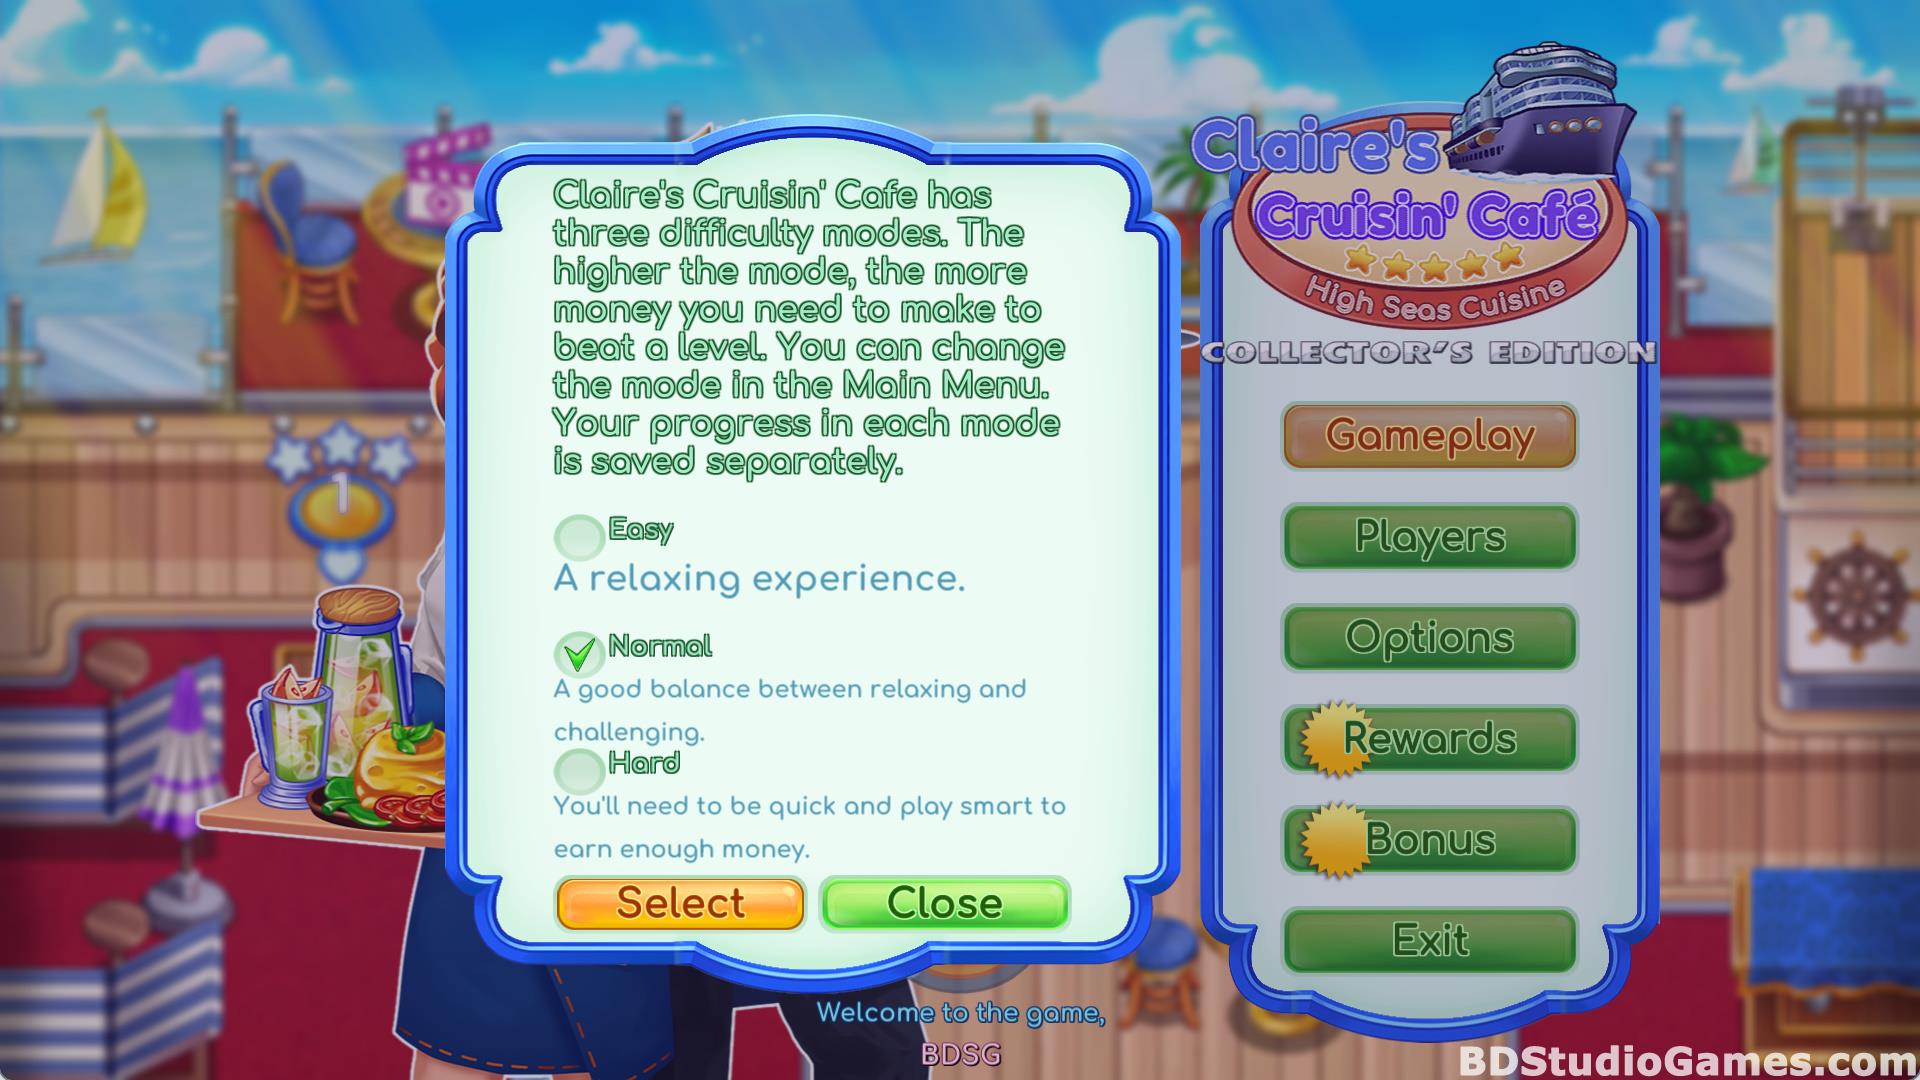 Claire's Cruisin' Cafe: High Seas Collector's Edition Free Download Screenshots 01